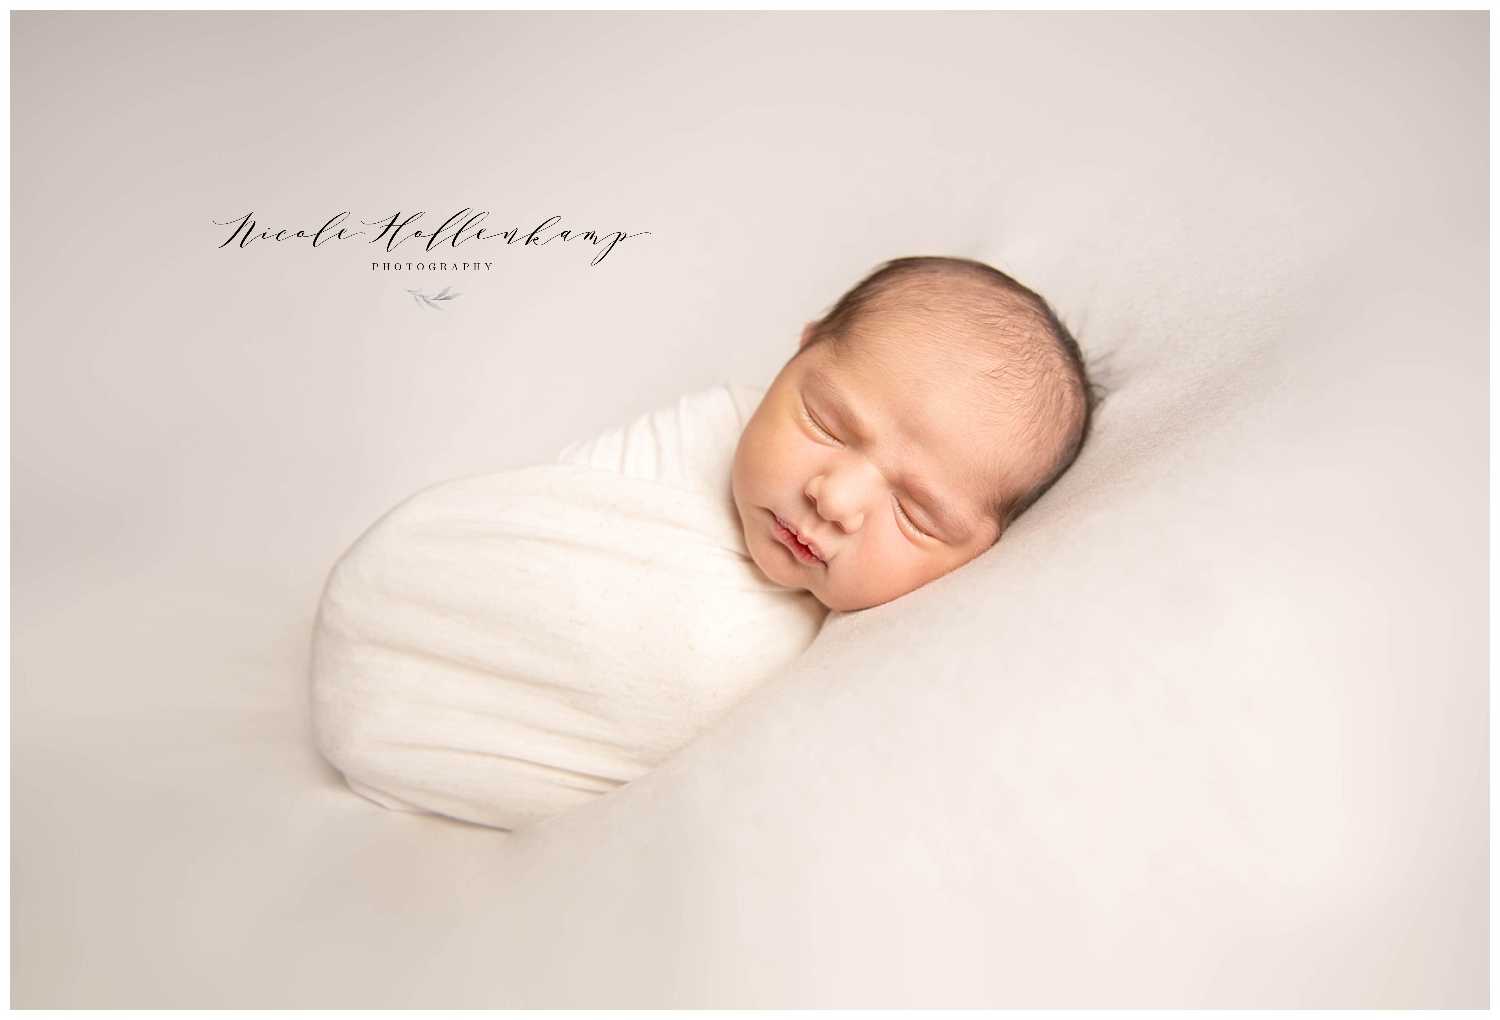 Newborn Photography Common Questions Client's Ask their photographer